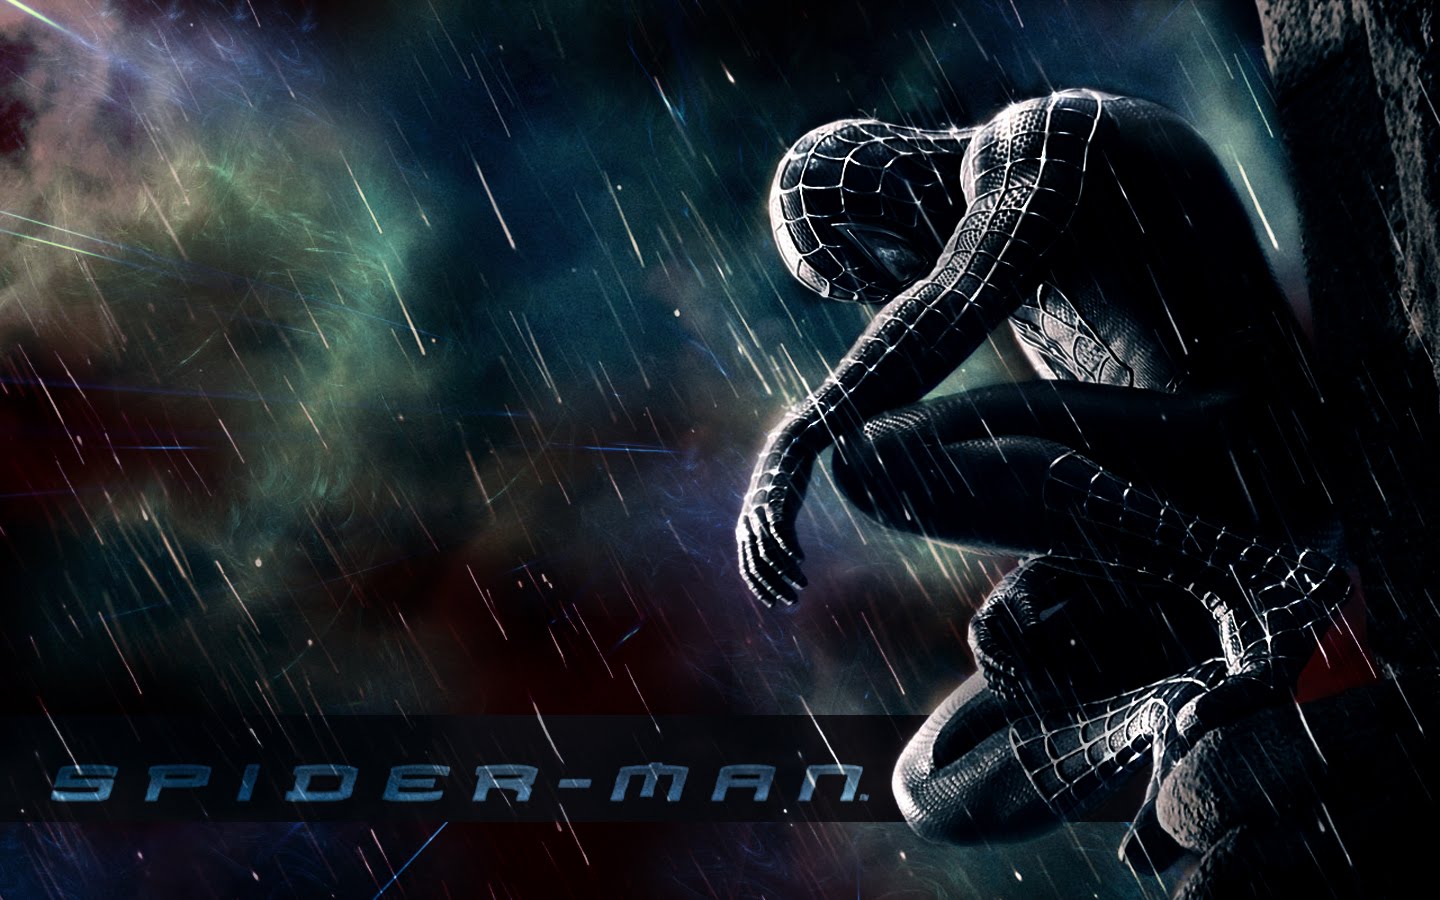 Download wallpapers free: Spiderman movie wallpapers Free